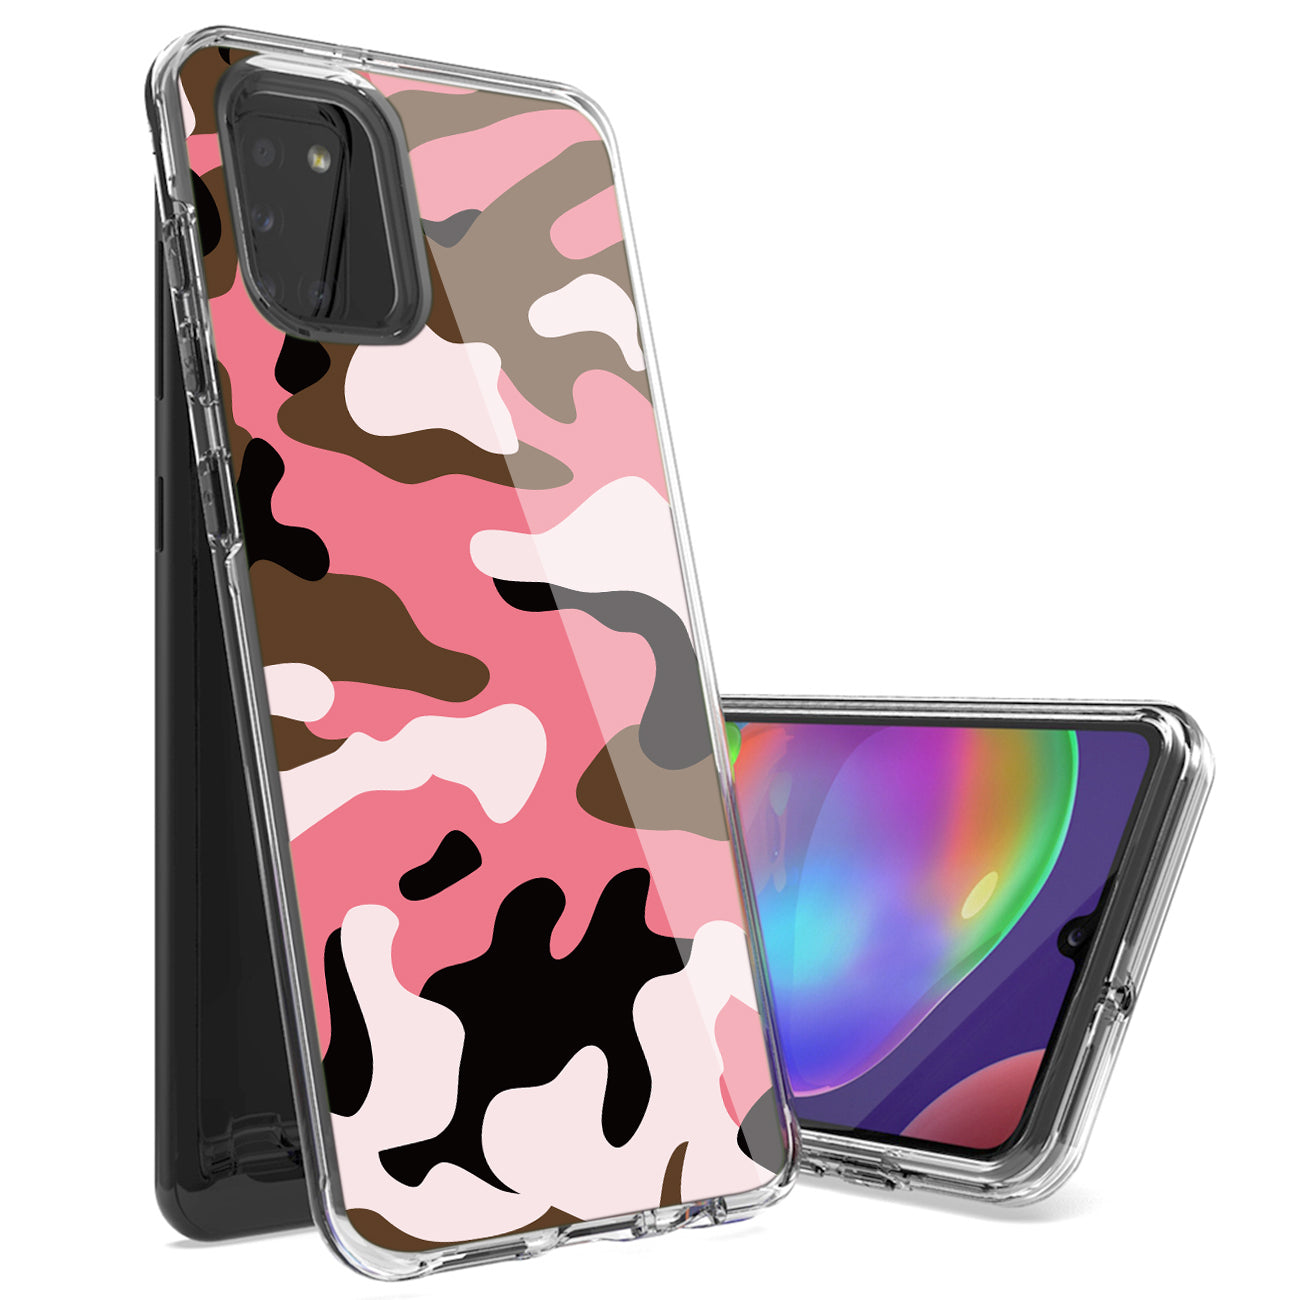 Camouflage Dual Layer Hybrid Hard & Soft TPU Rubber Case for SAMS GALAXY A31 In Pink